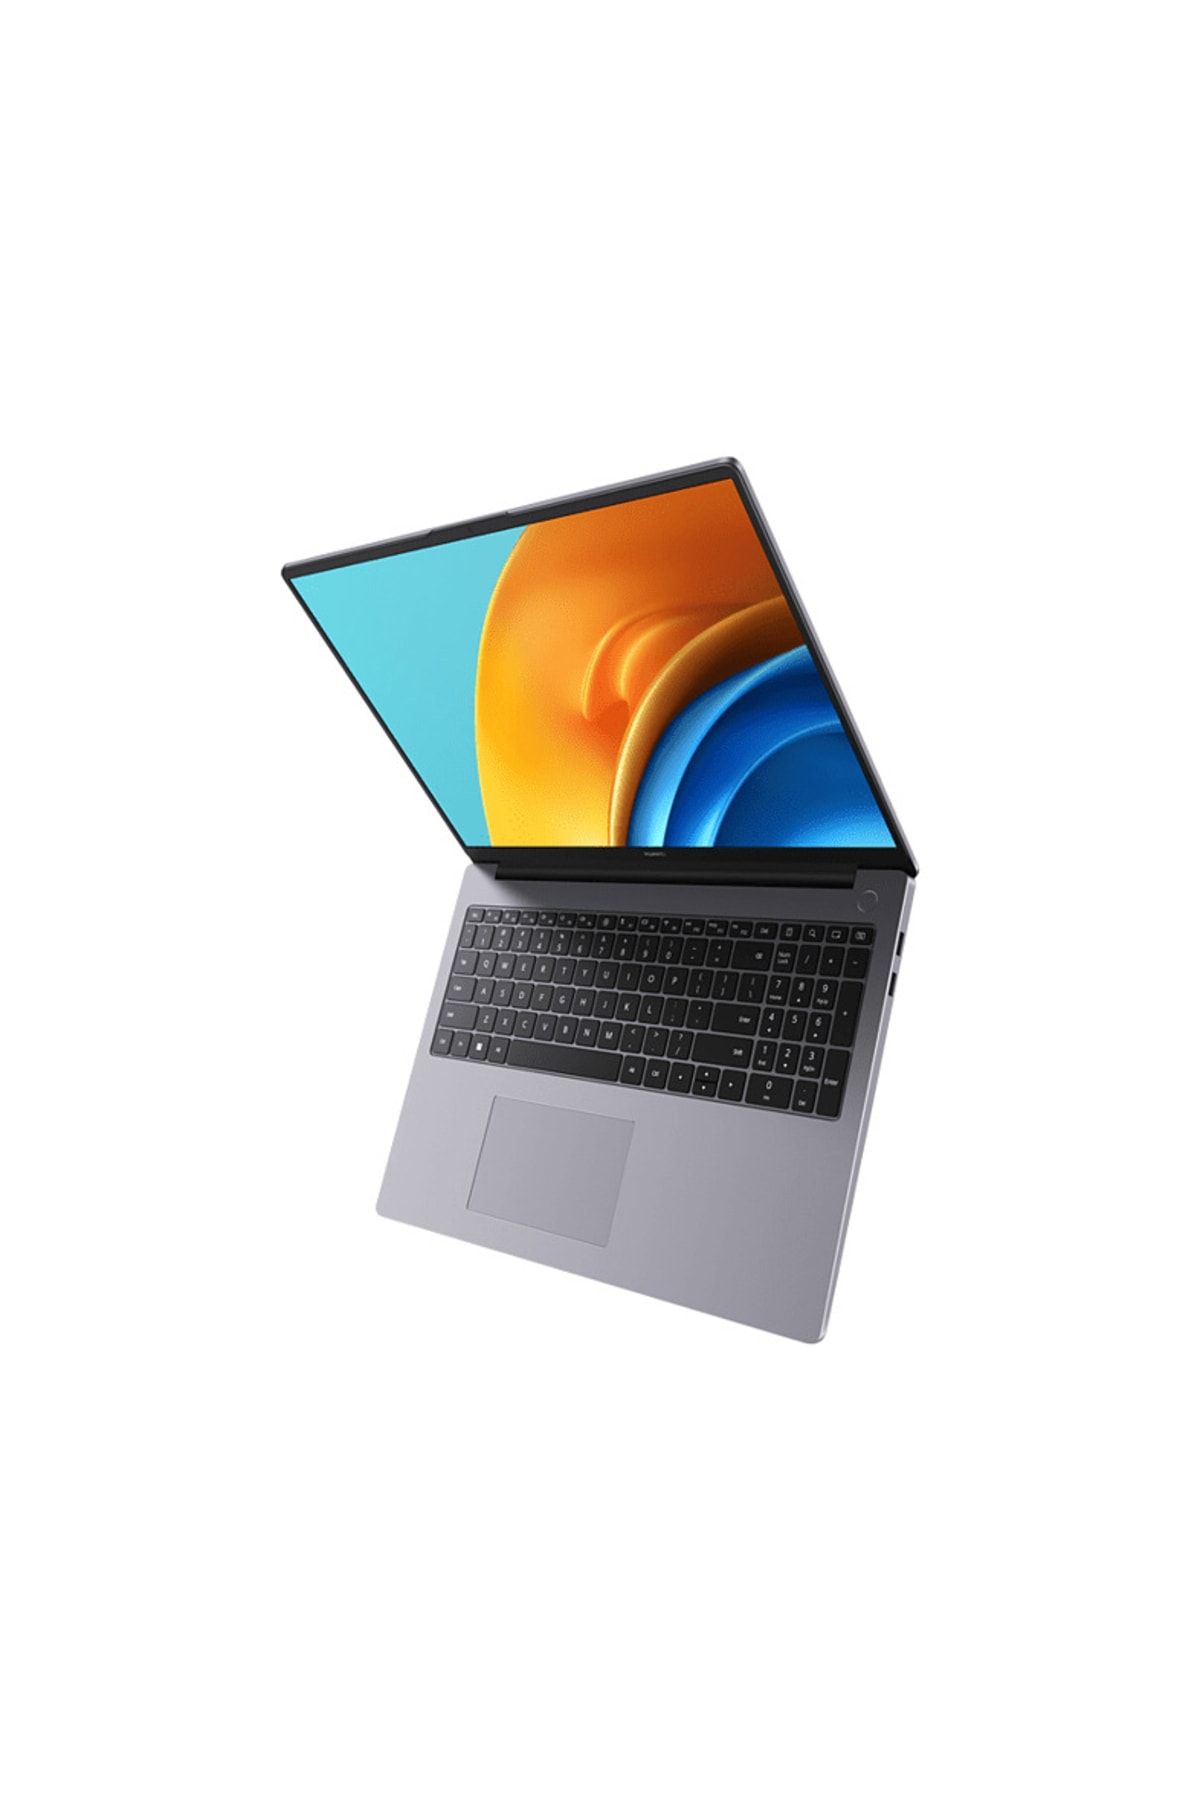 Huawei MATEBOOK d16 i5-12450h/16 ГБ/512 ГБ/Space Gray охлаждение. Huawei MATEBOOK d16 i5-12450h/16 ГБ/512 ГБ/Space Gray.